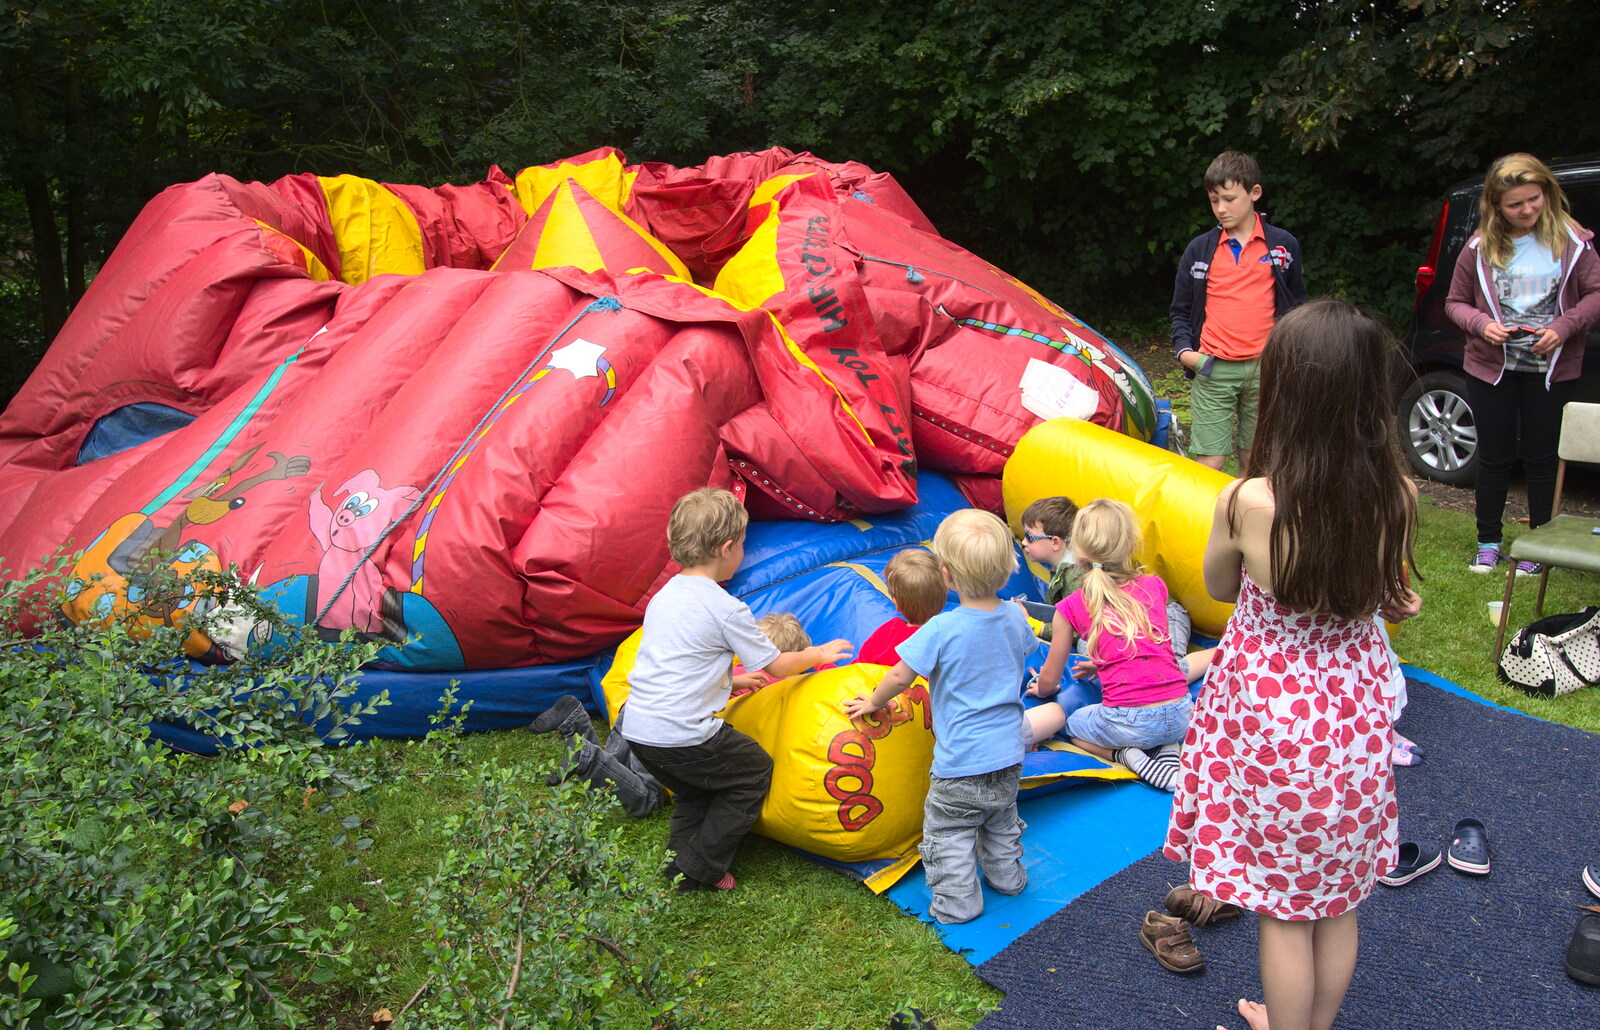 The bouncy castle has tragically deflated from The Village Summer Fête, Brome, Suffolk - 5th July 2014